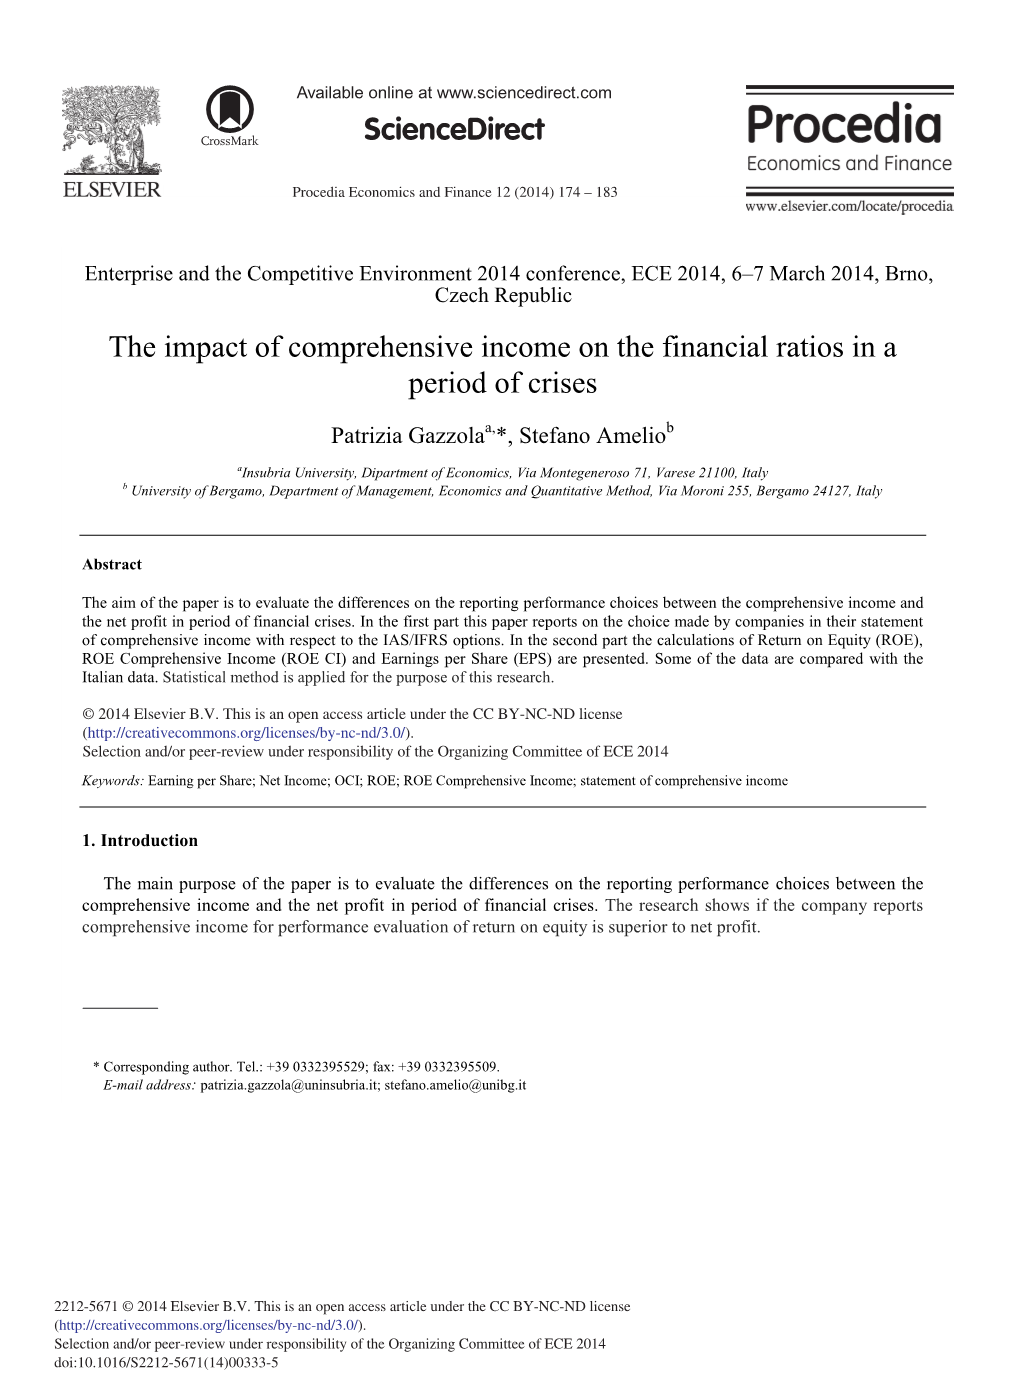 The Impact of Comprehensive Income on the Financial Ratios in a Period of Crises